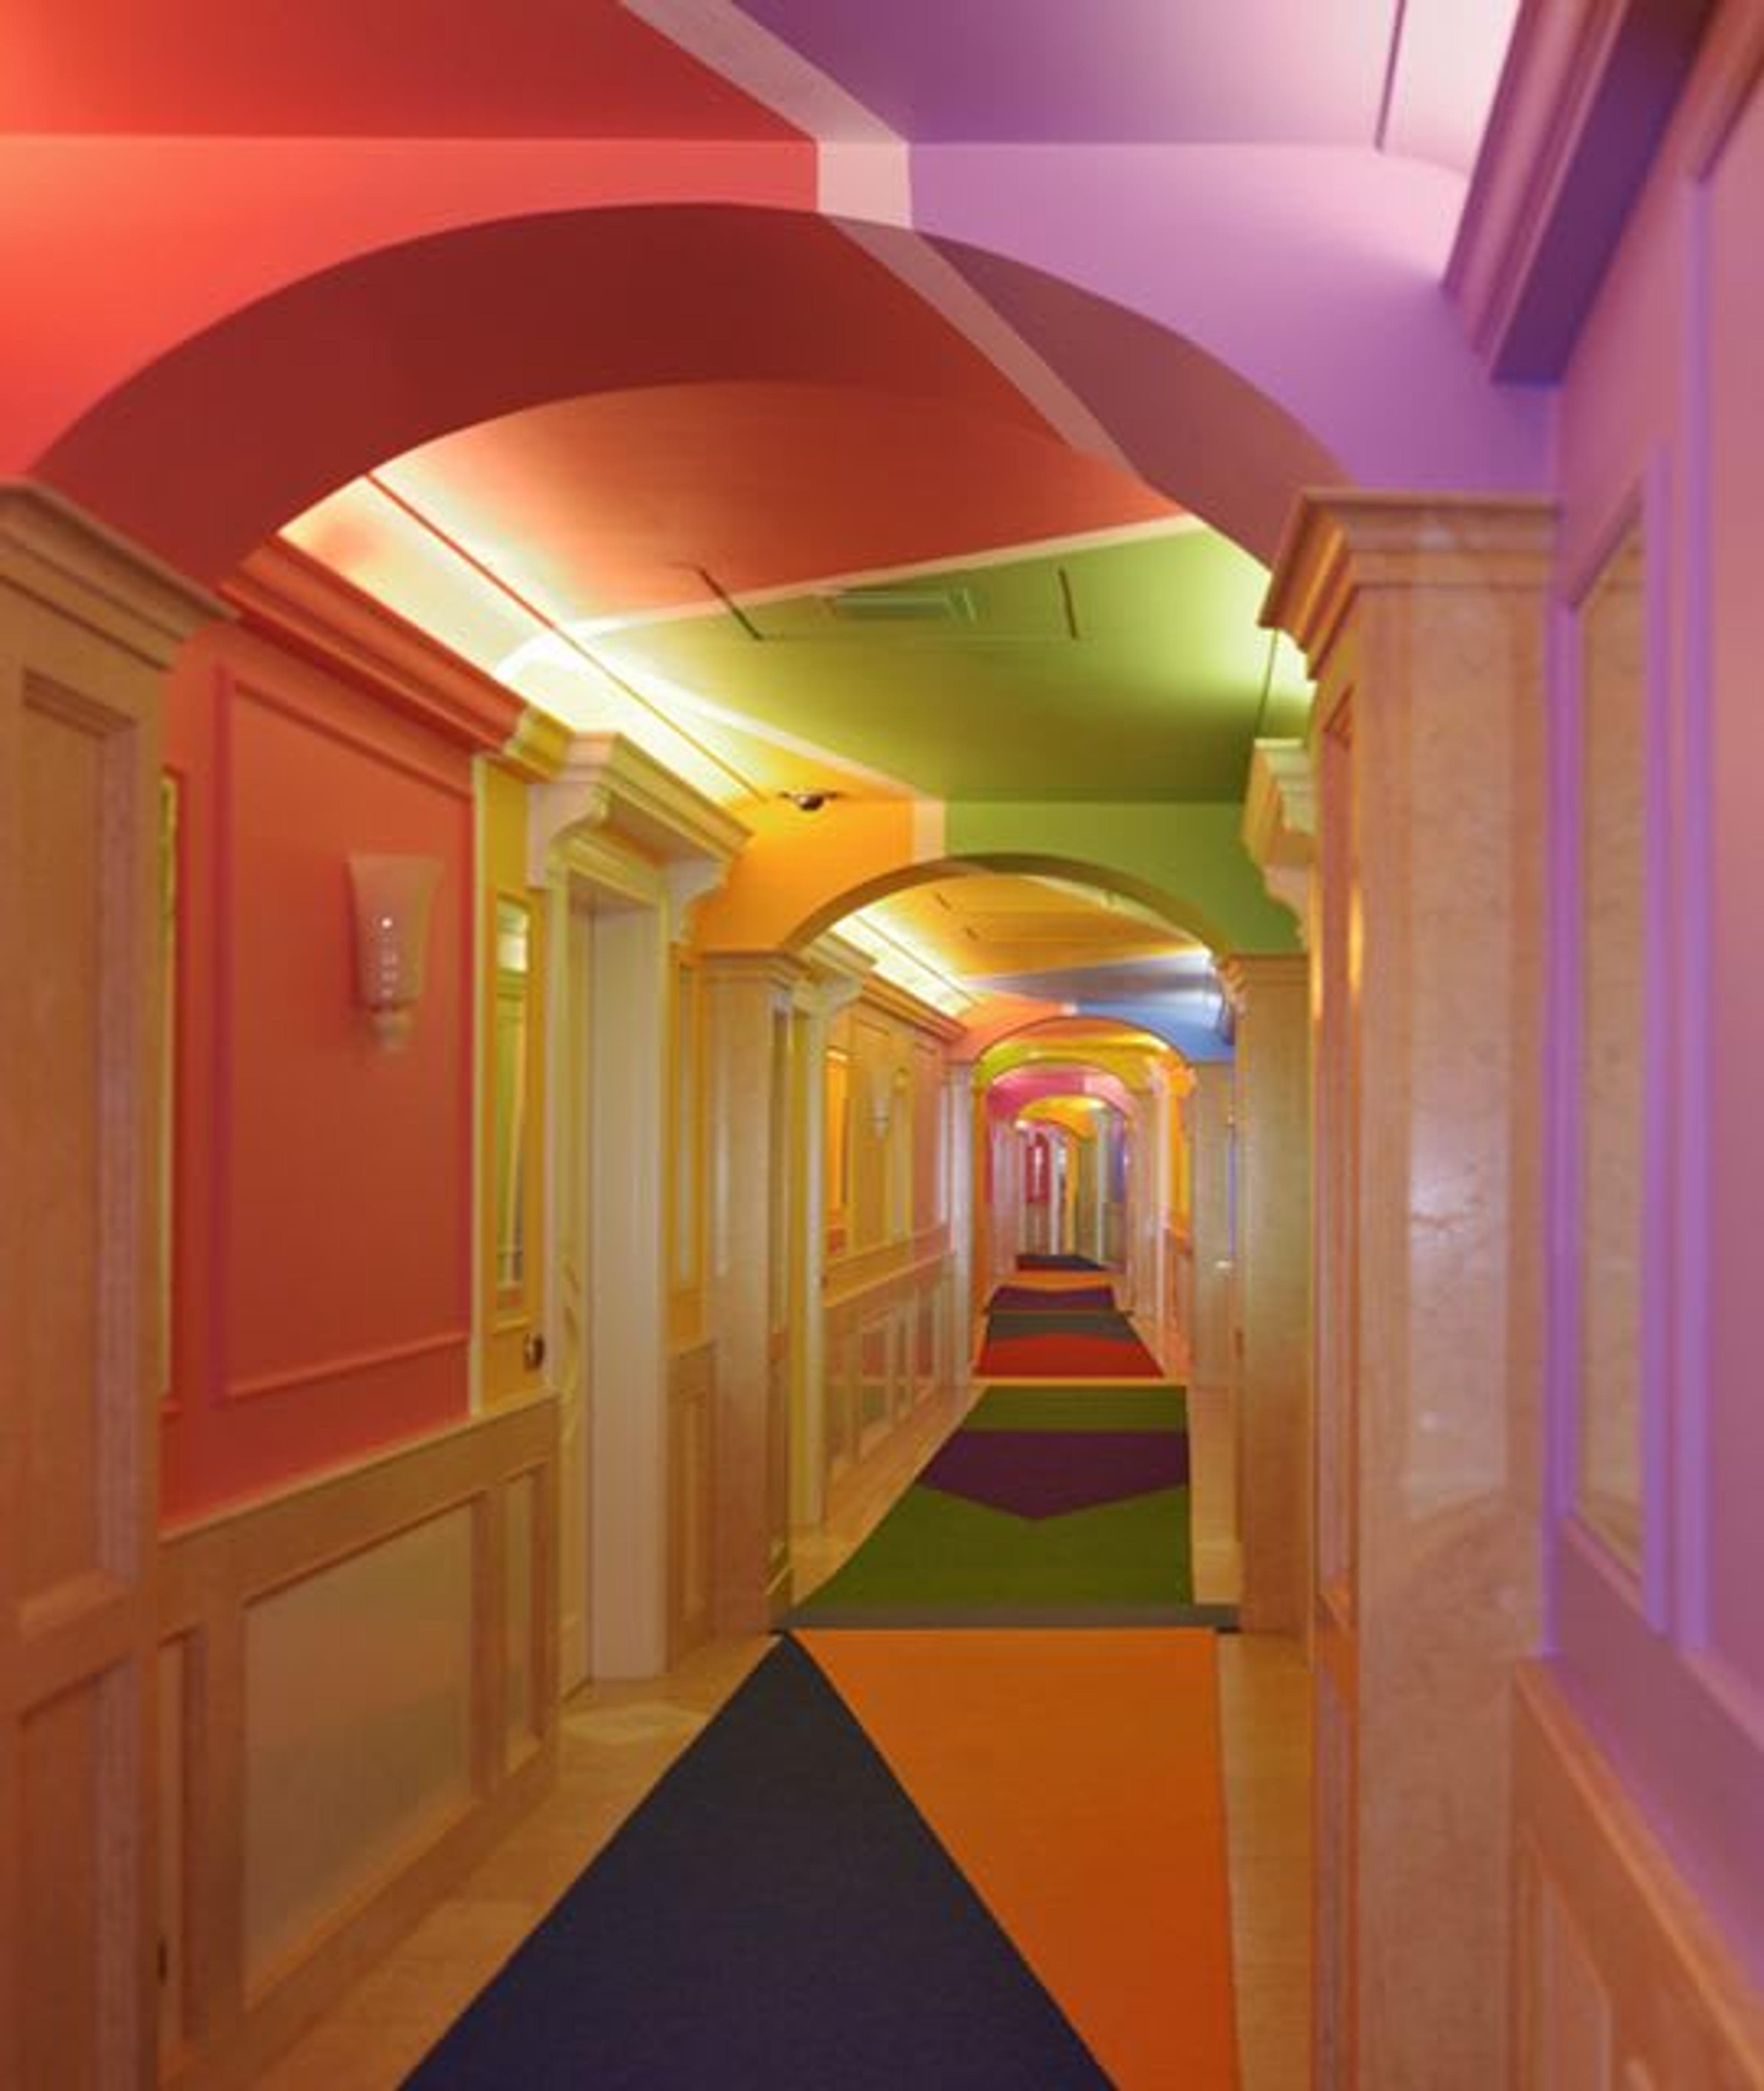 Colorful Interiors of the Hotel.